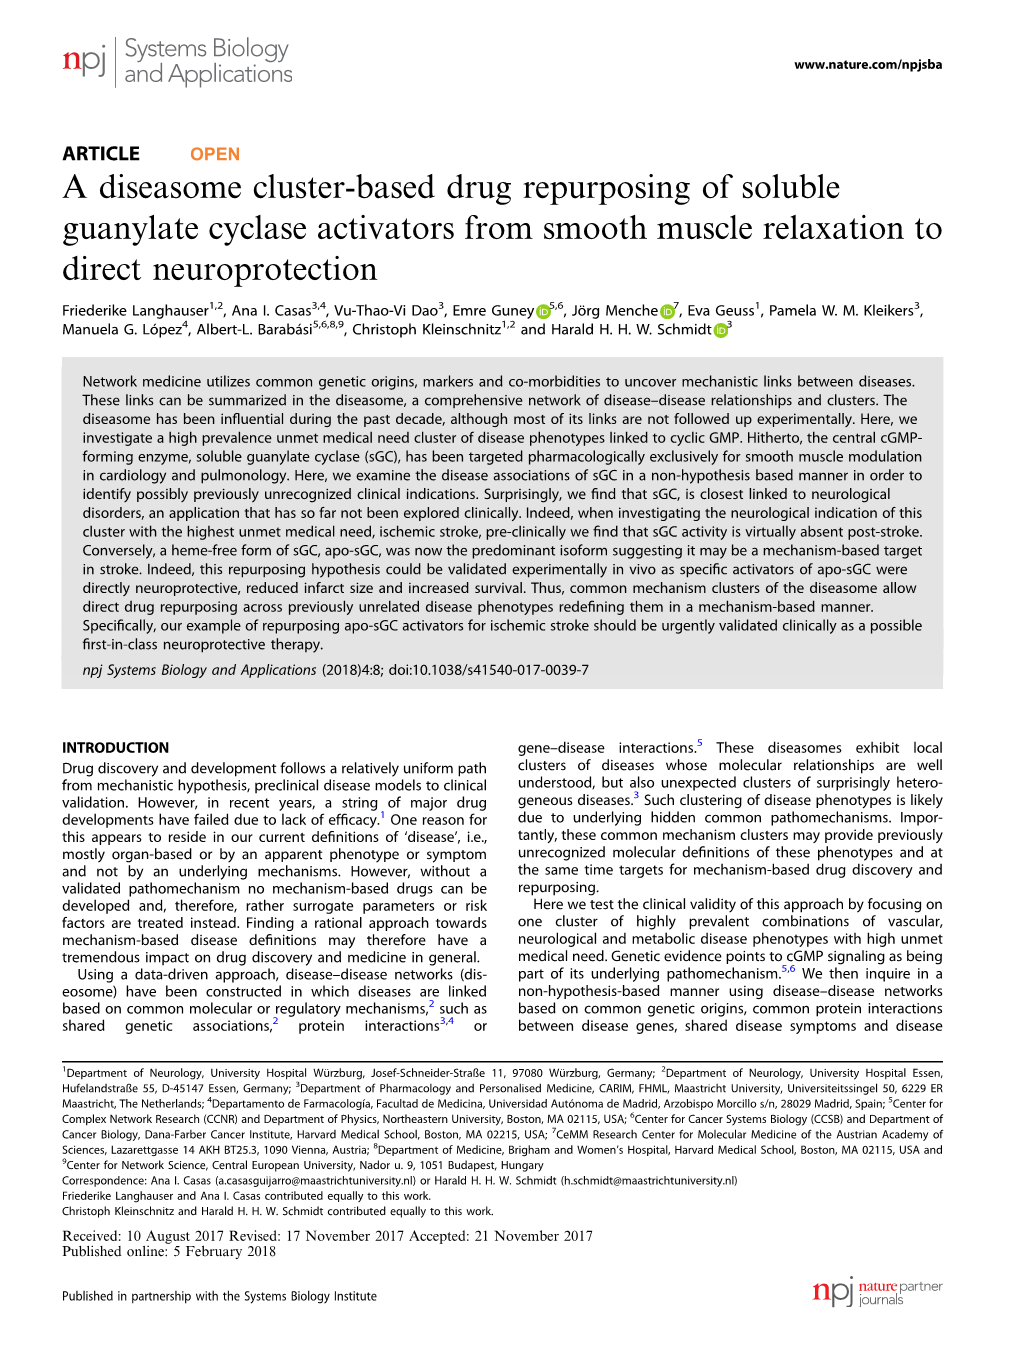 A Diseasome Cluster-Based Drug Repurposing of Soluble Guanylate Cyclase Activators from Smooth Muscle Relaxation to Direct Neuroprotection